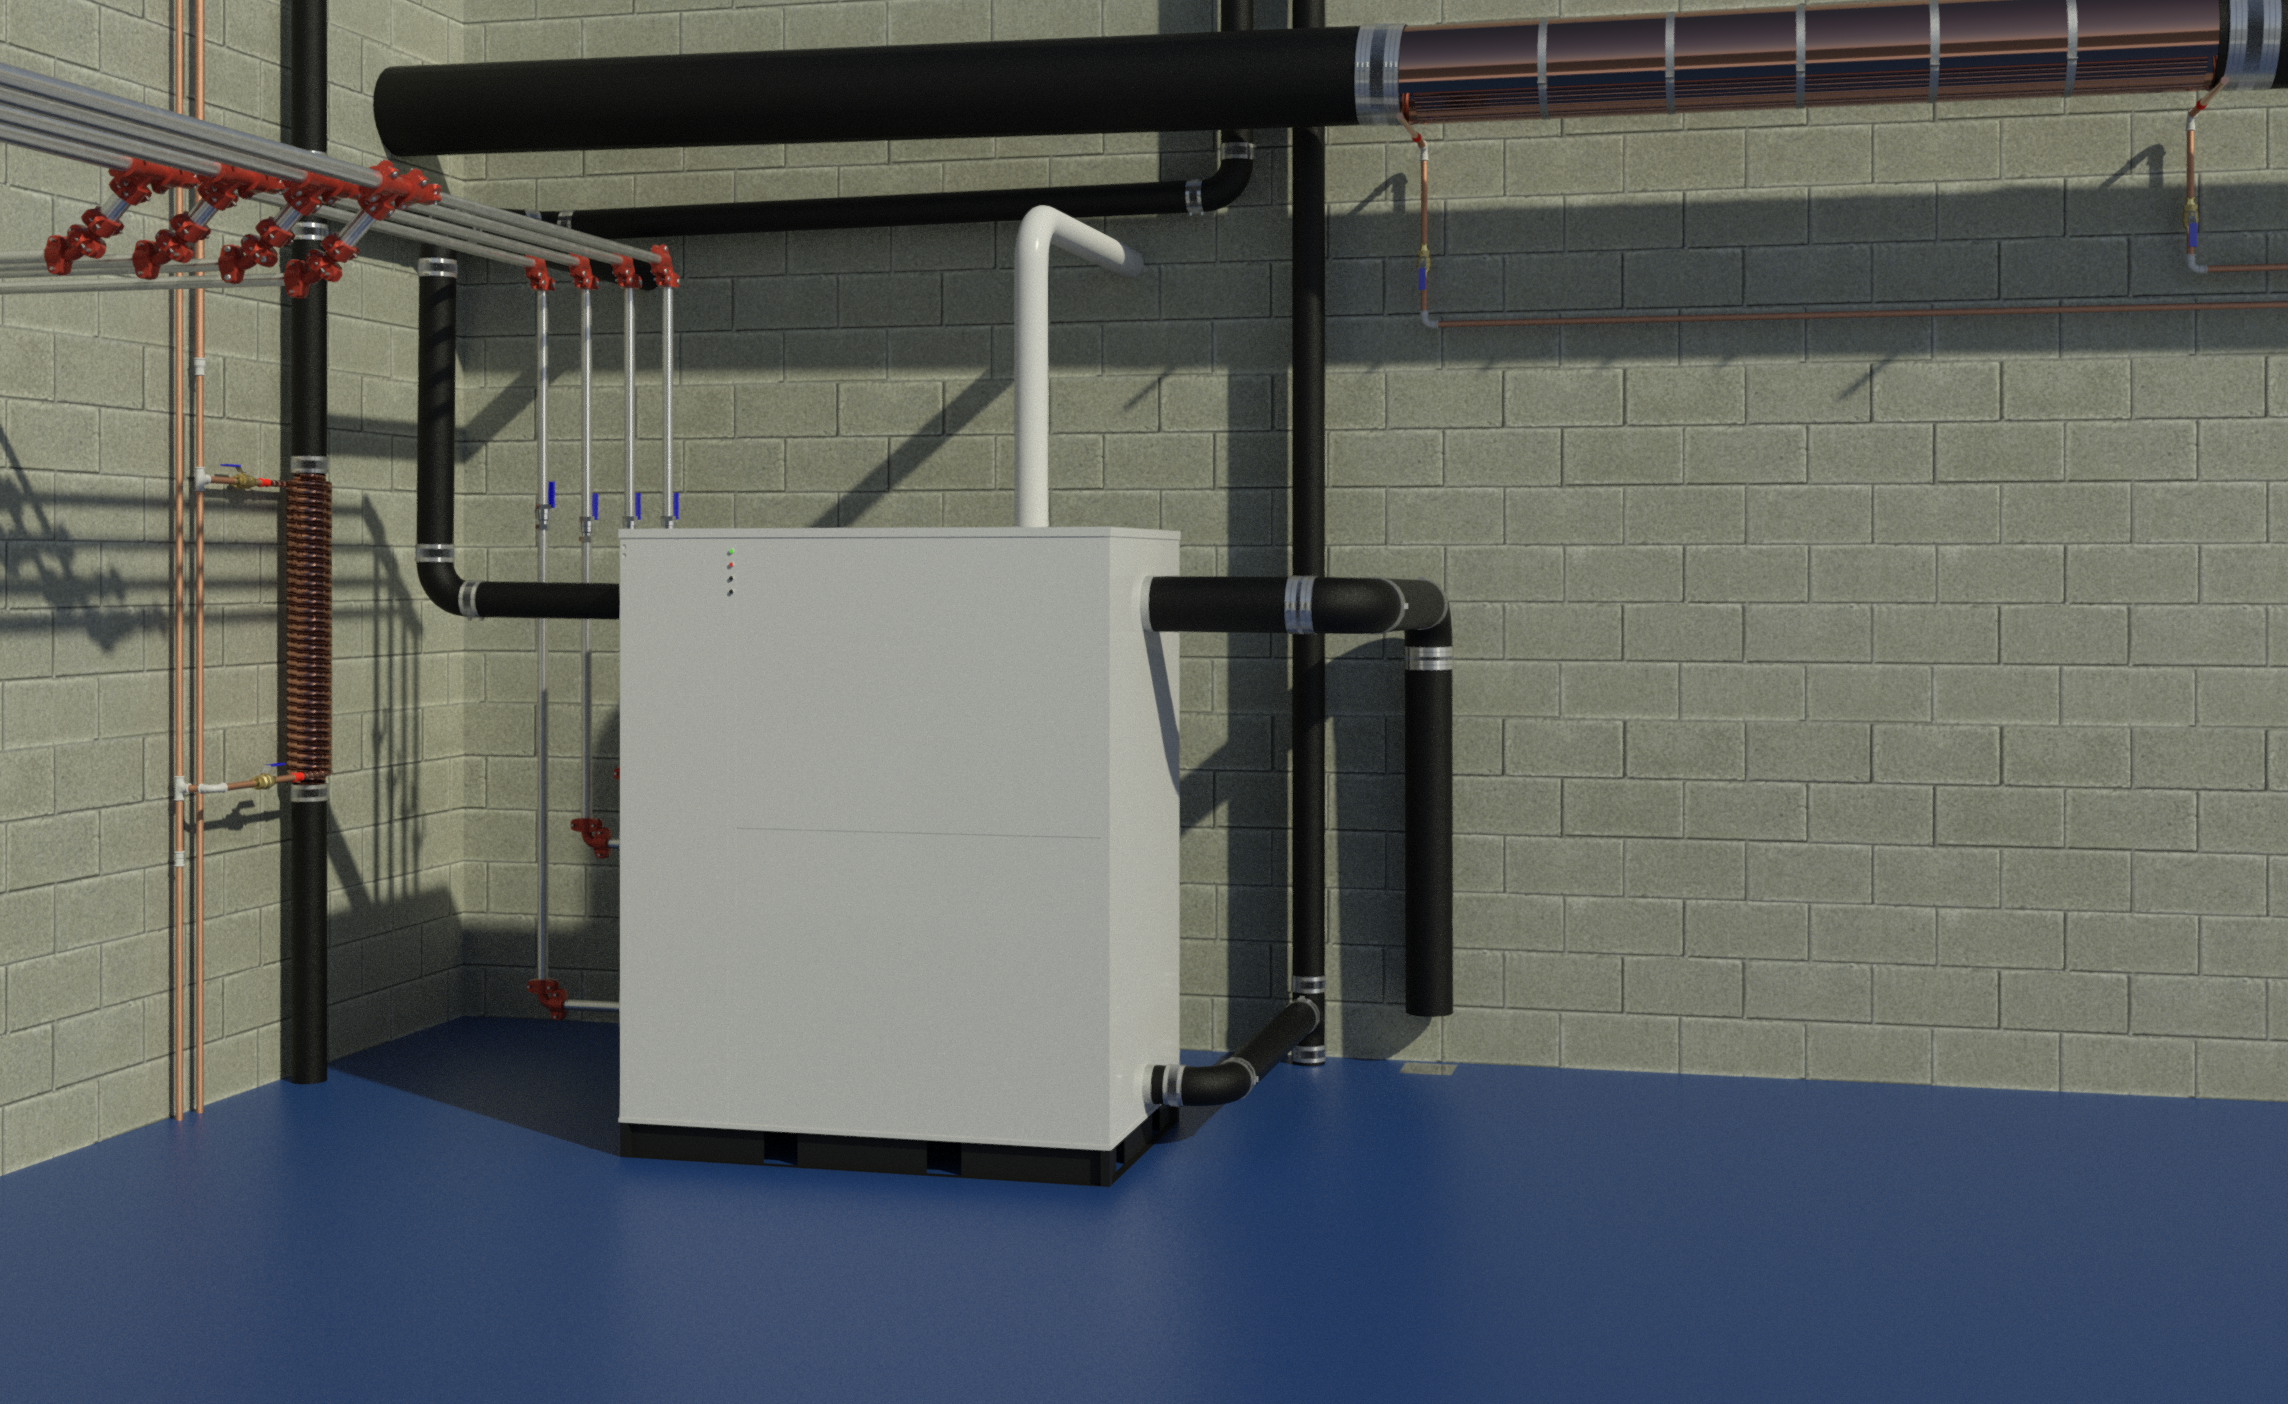 Revit mockup showing a render of a plantroom.  Several items from the collection demonstrated in connected systems.